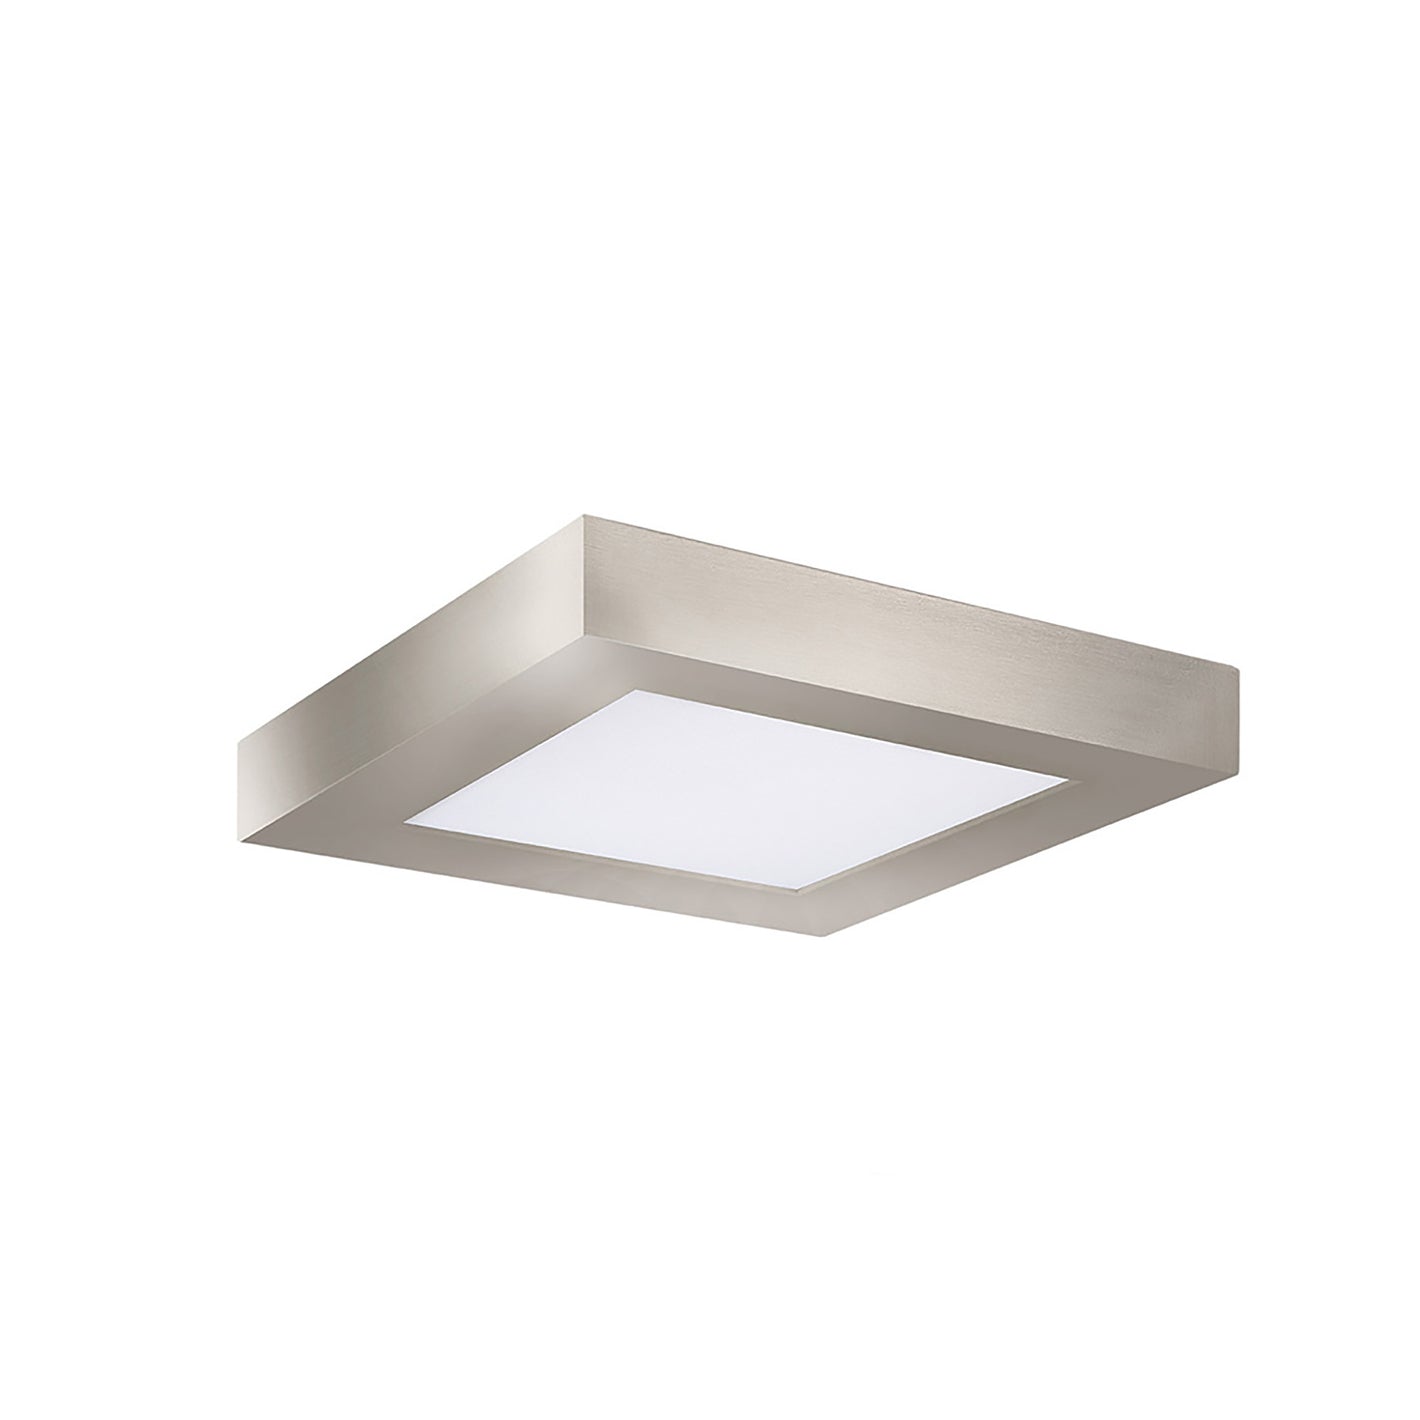 5.5 Inch Square 5CCT Color Selectable Surface Mount Panel Light Fixture, Brush Nickel Finish